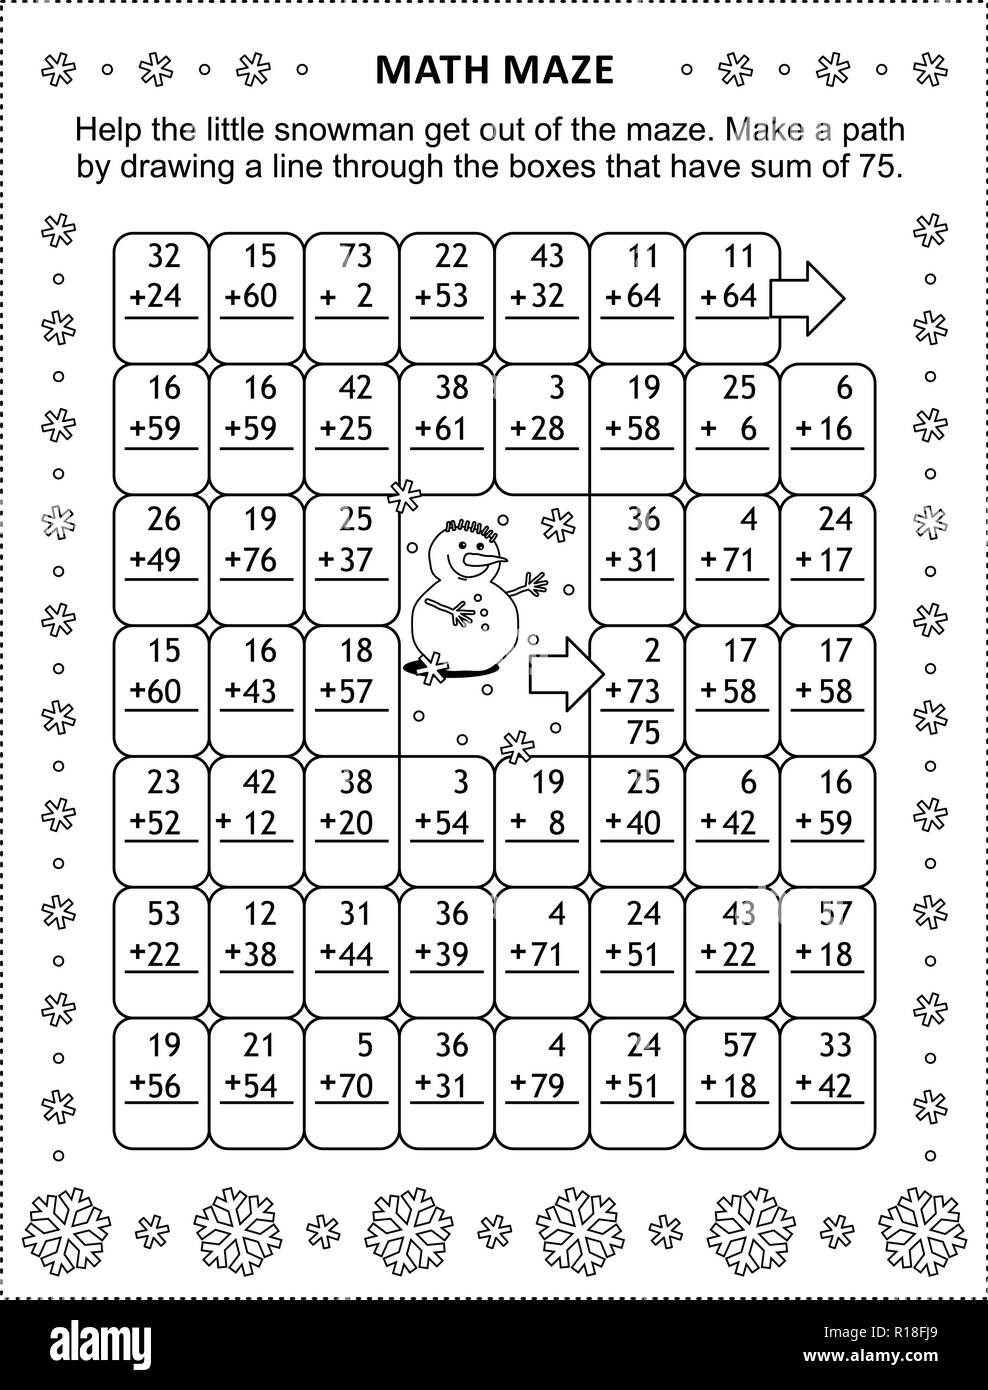 Math maze with addition facts: Help the snowman get out of the maze. Make a path by drawing a line through the boxes that have sum of 75. Stock Vector